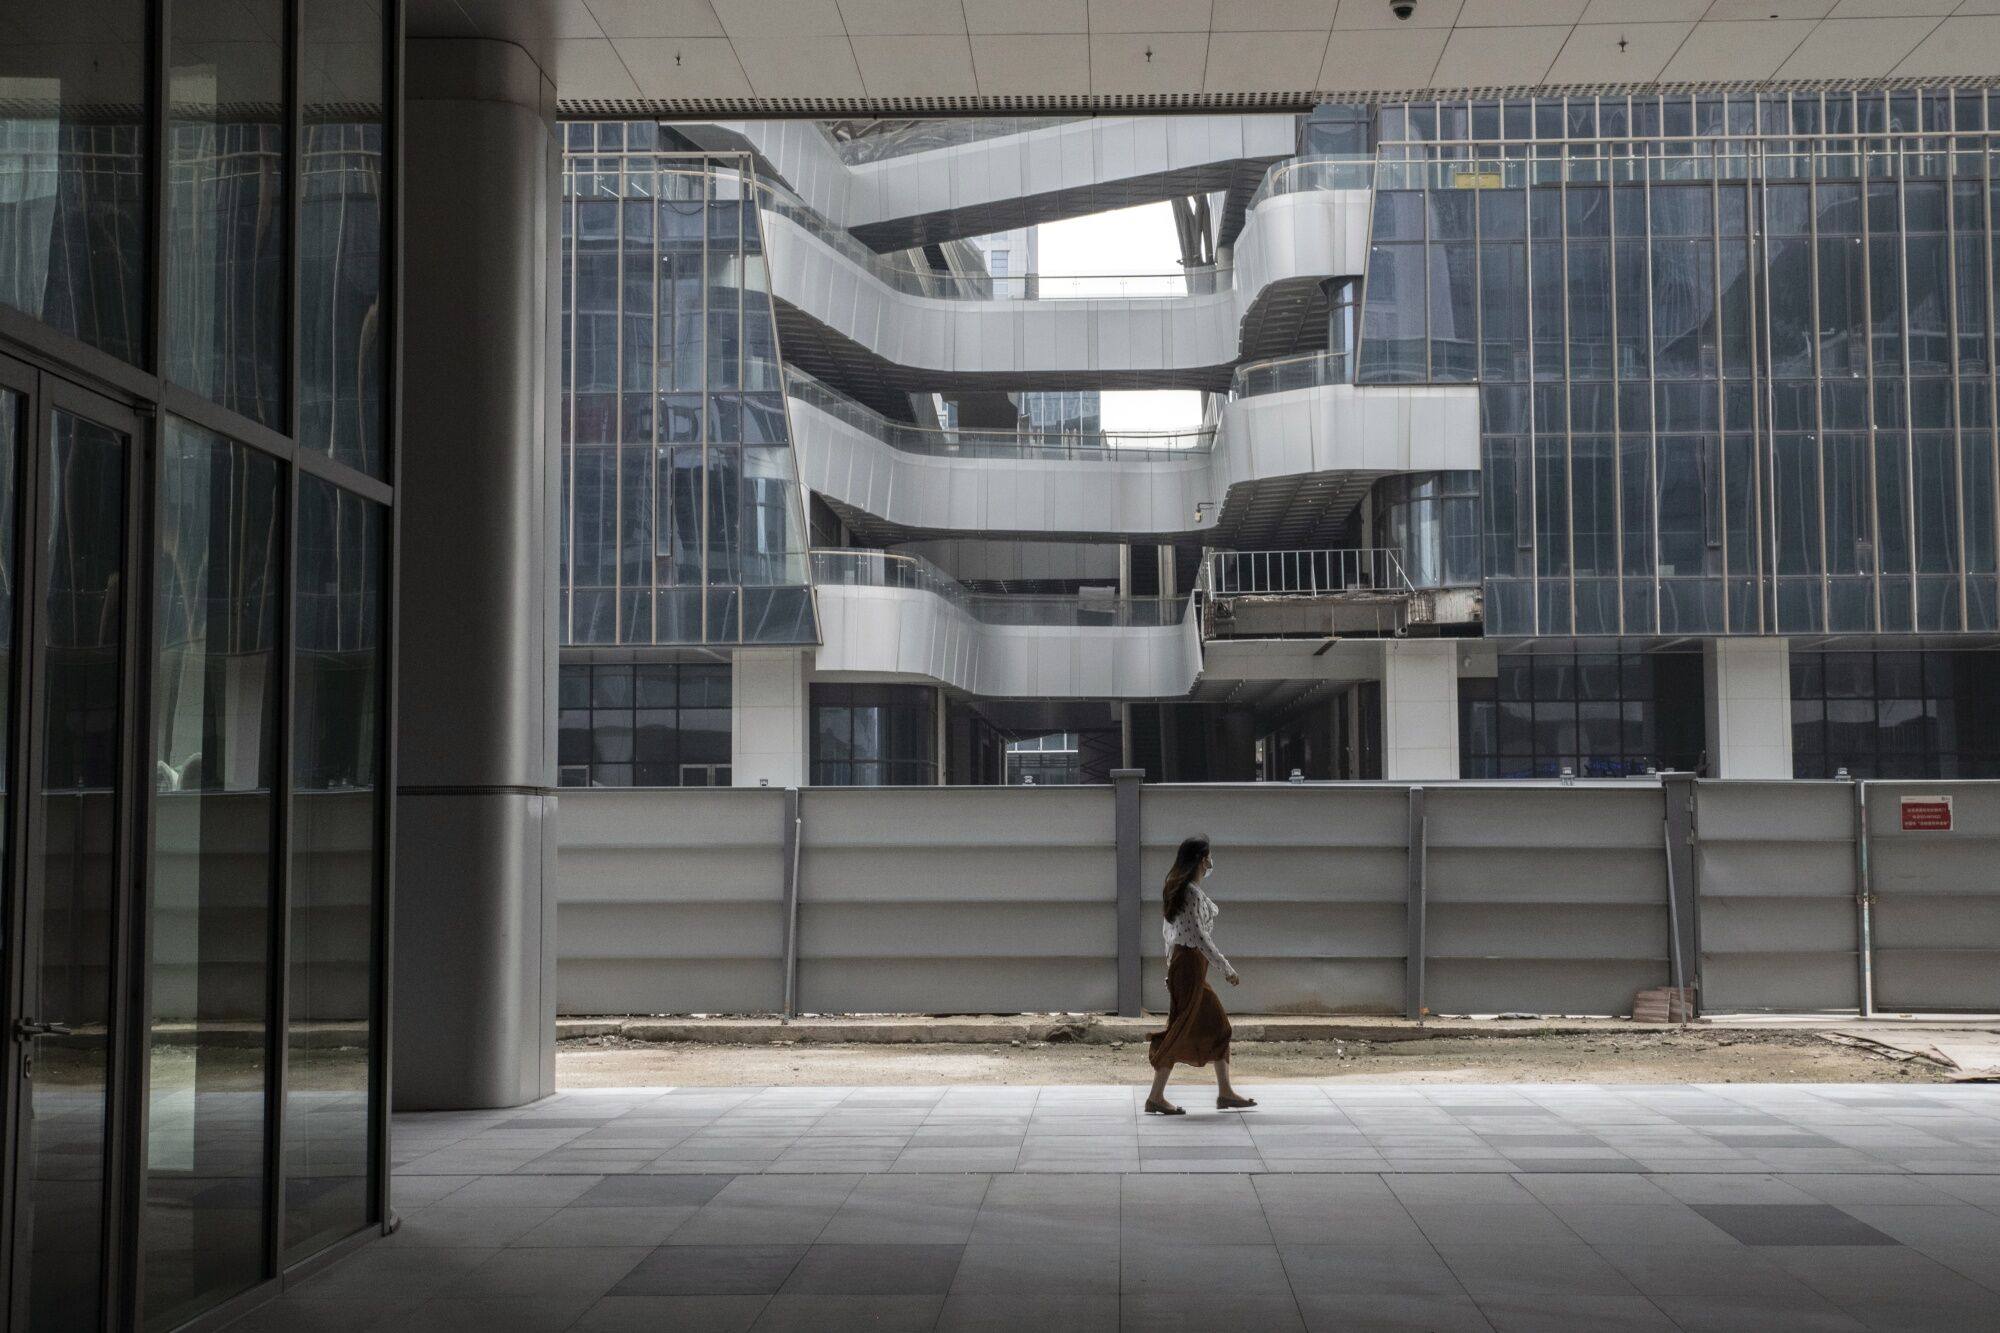 A pedestrian passes a construction site for a commercial building in the Pazhou area of Guangzhou on May 9. Mainland China has emerged as a favourite destination for commercial property investment since Beijing ended its zero-Covid policy, taking in a fifth of outbound capital from Singapore, one of the Asia-Pacific’s leading investment sources. Photo: Bloomberg